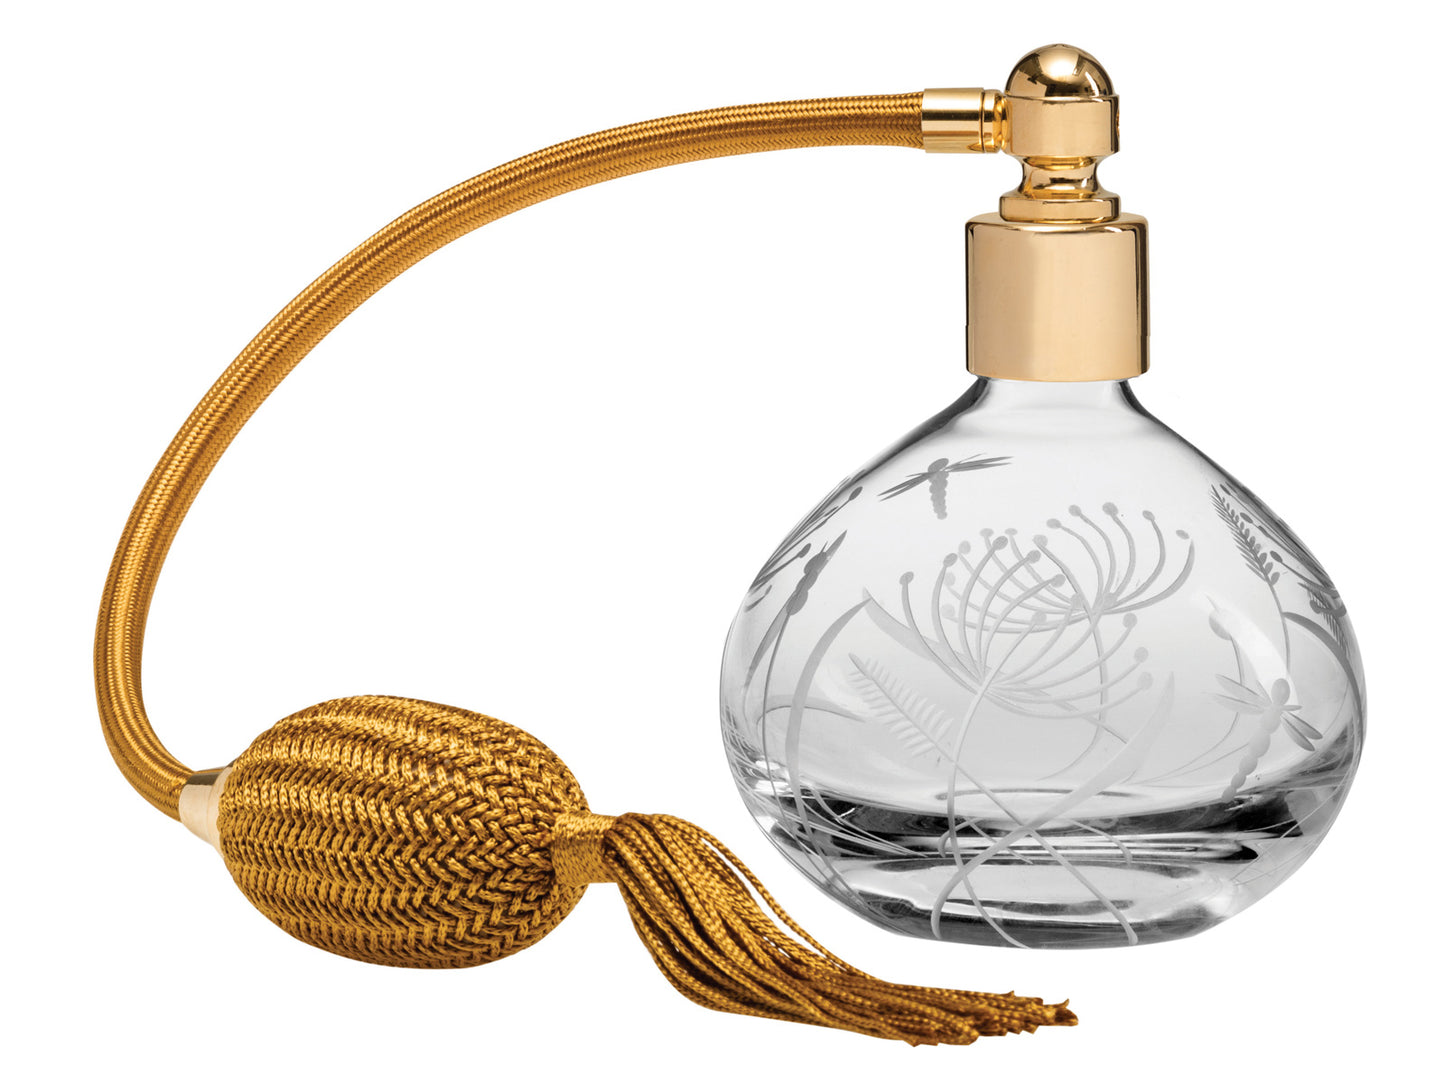 A crystal perfume atomiser bottle with dragonflies and delicate botanicals carved into the outside, topped with gold hardware and a gold puffer